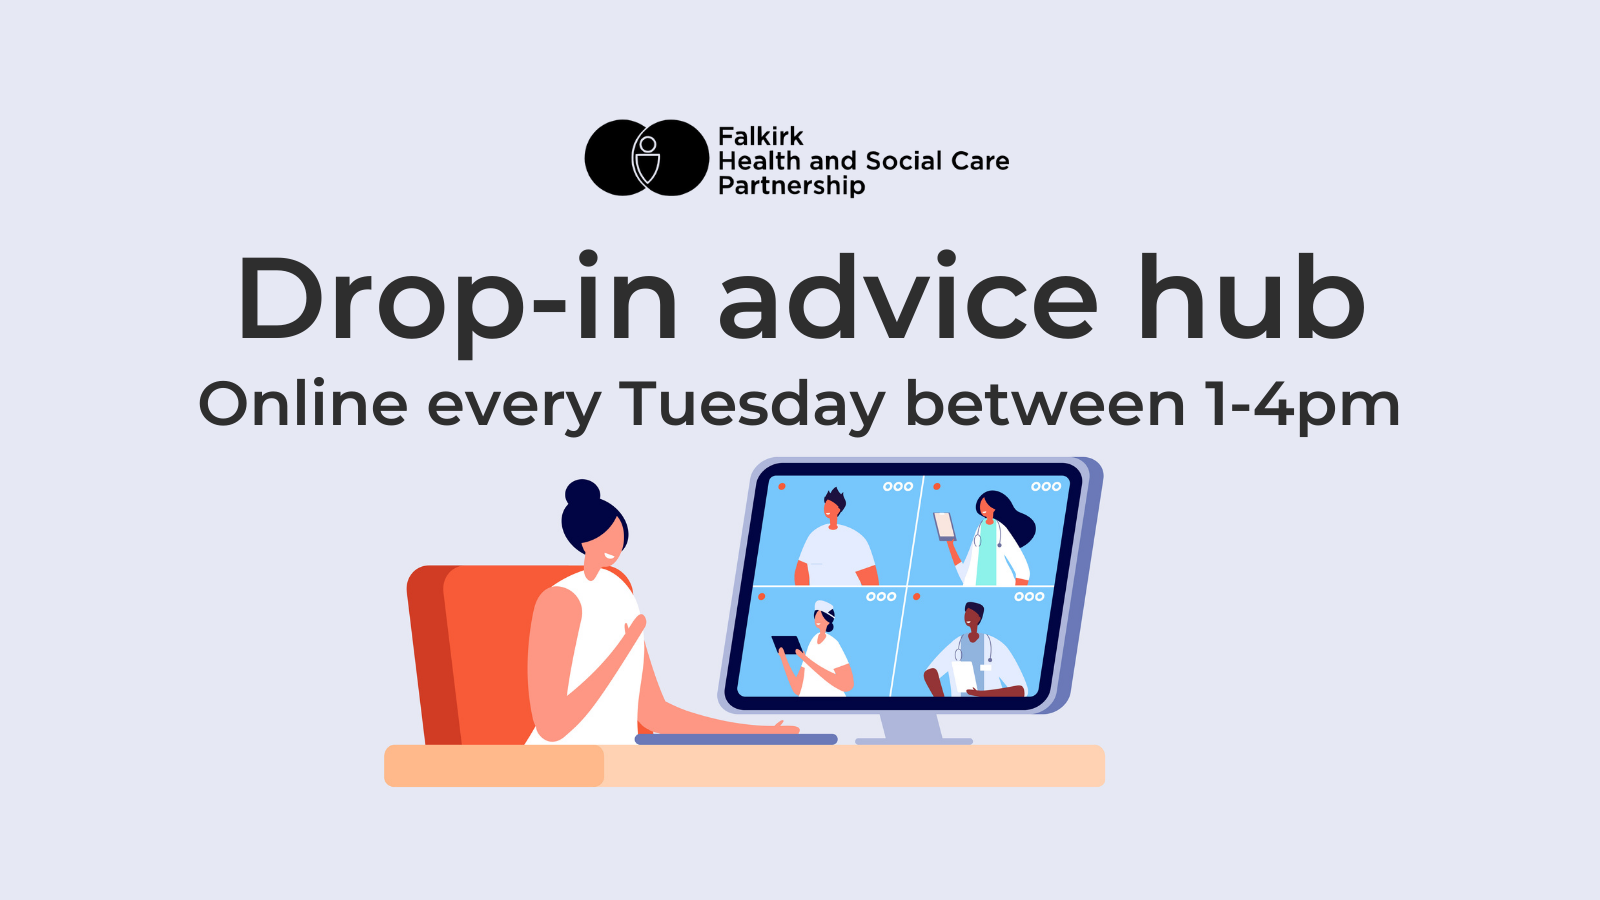 Drop-in advice hub, available every Tuesday between 1-4pm